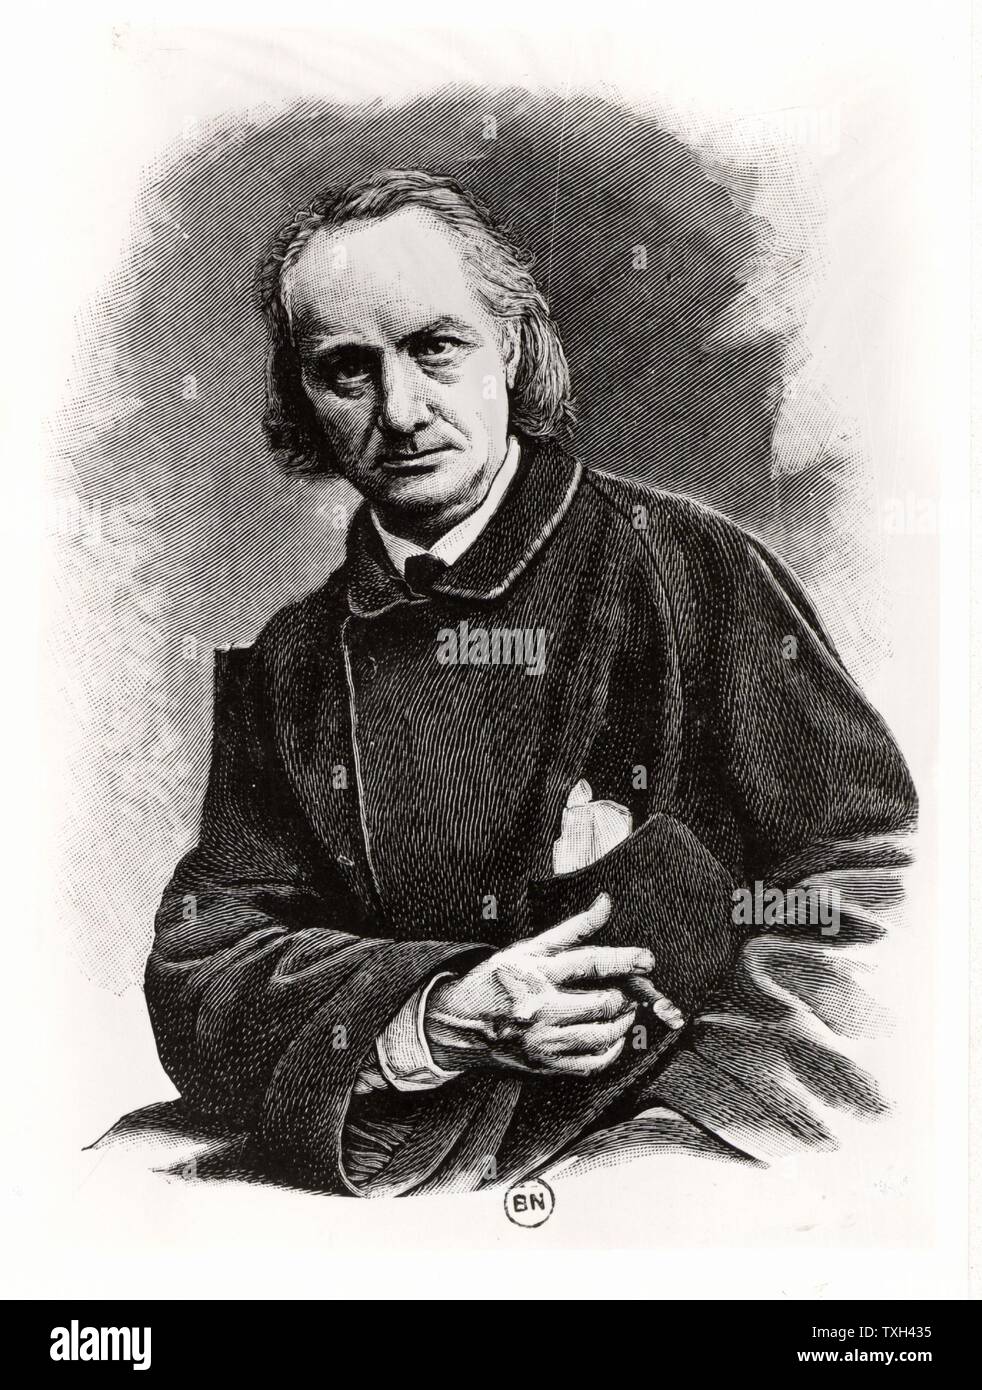 Charles Pierre Baudelaire (1821-1867) French poet, critic and translator.   Engraving after a photograph taken in 1864. Stock Photo